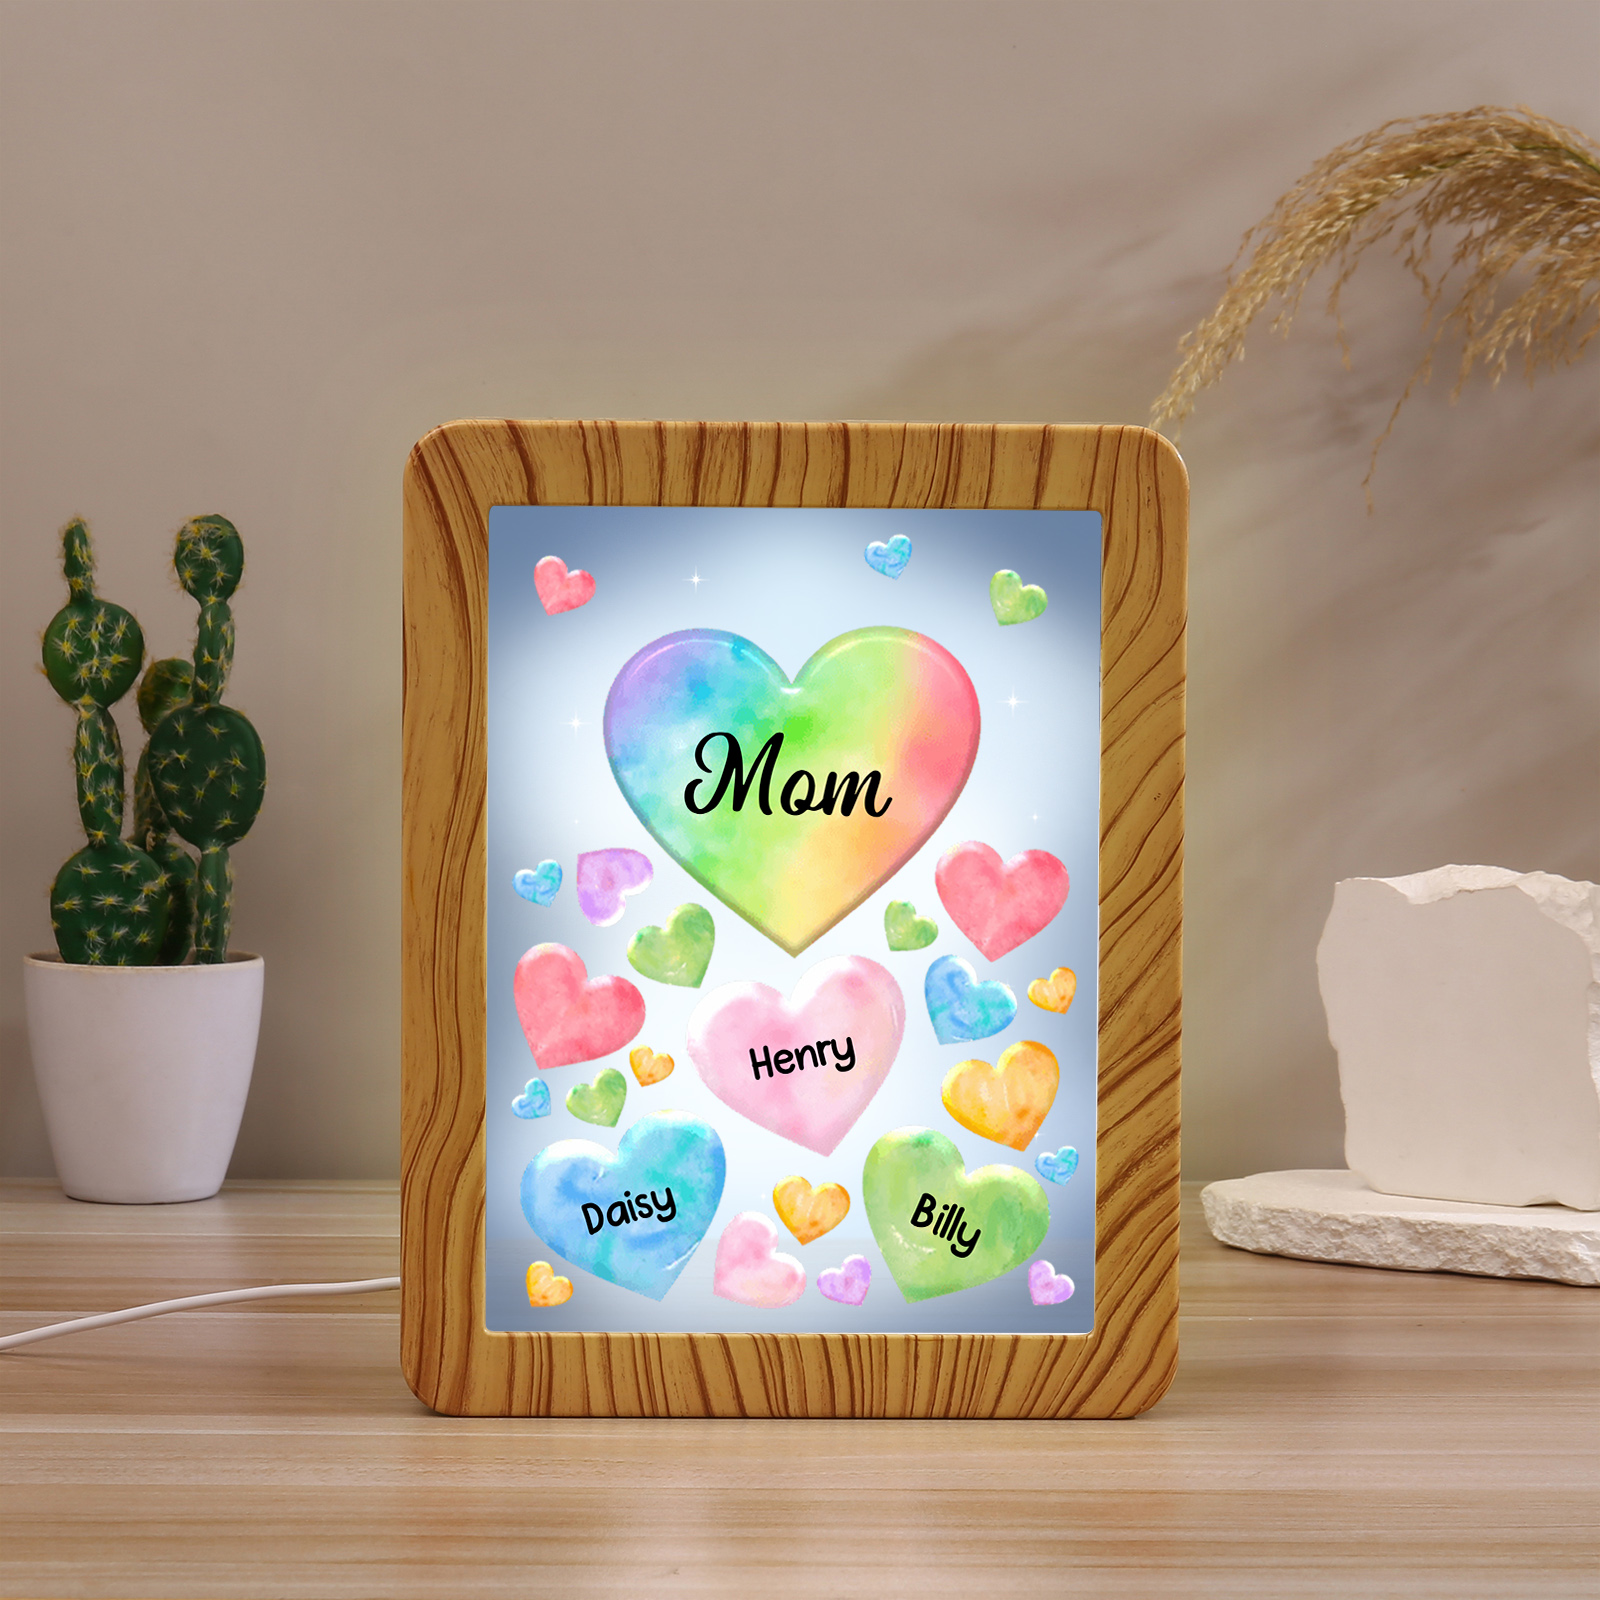 3 Names - Personalized Mom Home Wood Color Plug-in Mirror Photo Frame Custom Text LED Night Light Gift for Mom